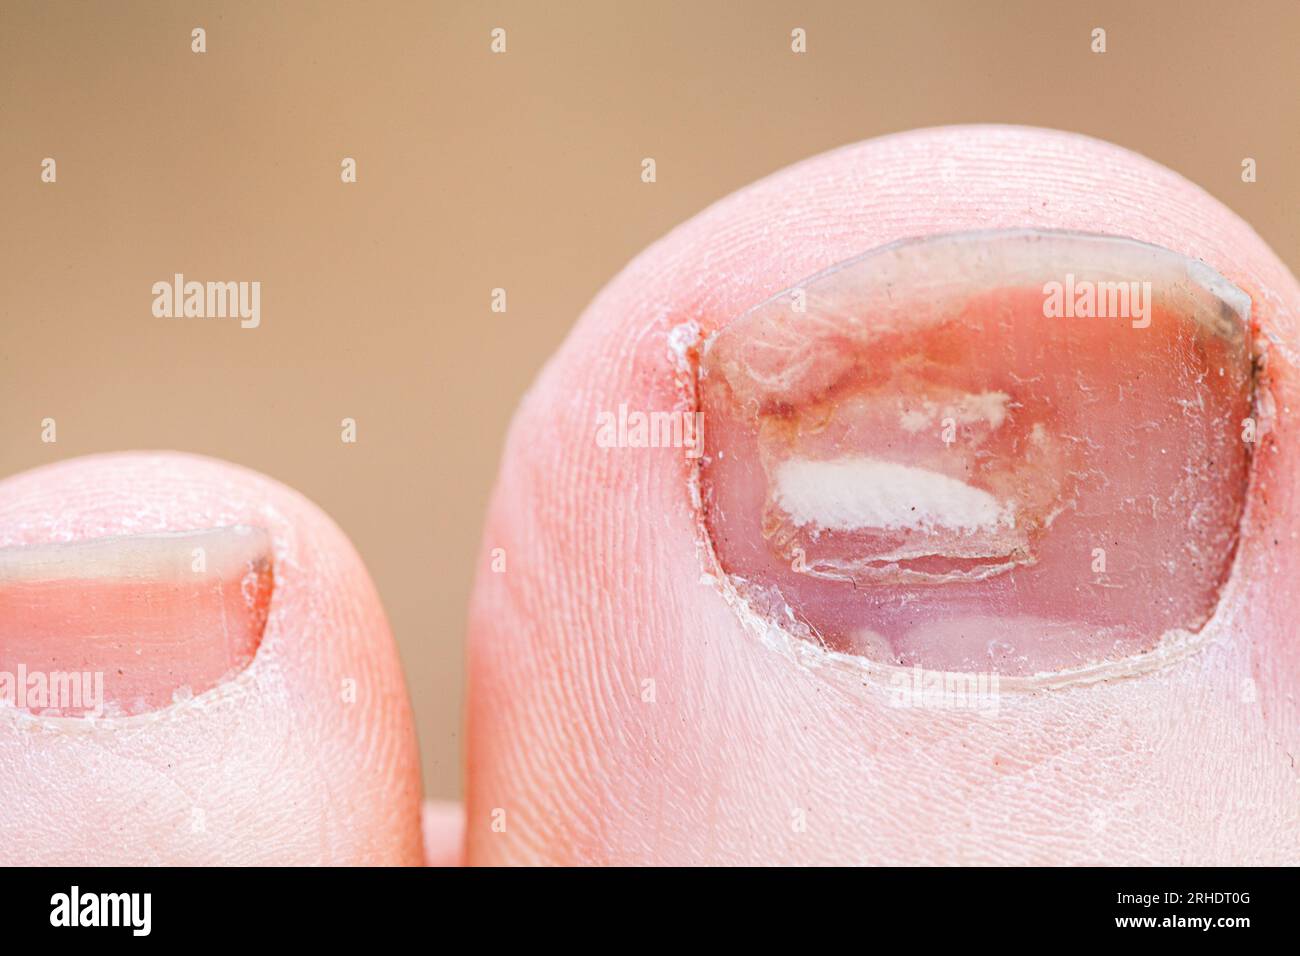 Macro shot of toe with nail growing back in after injury that damaged toenail Stock Photo